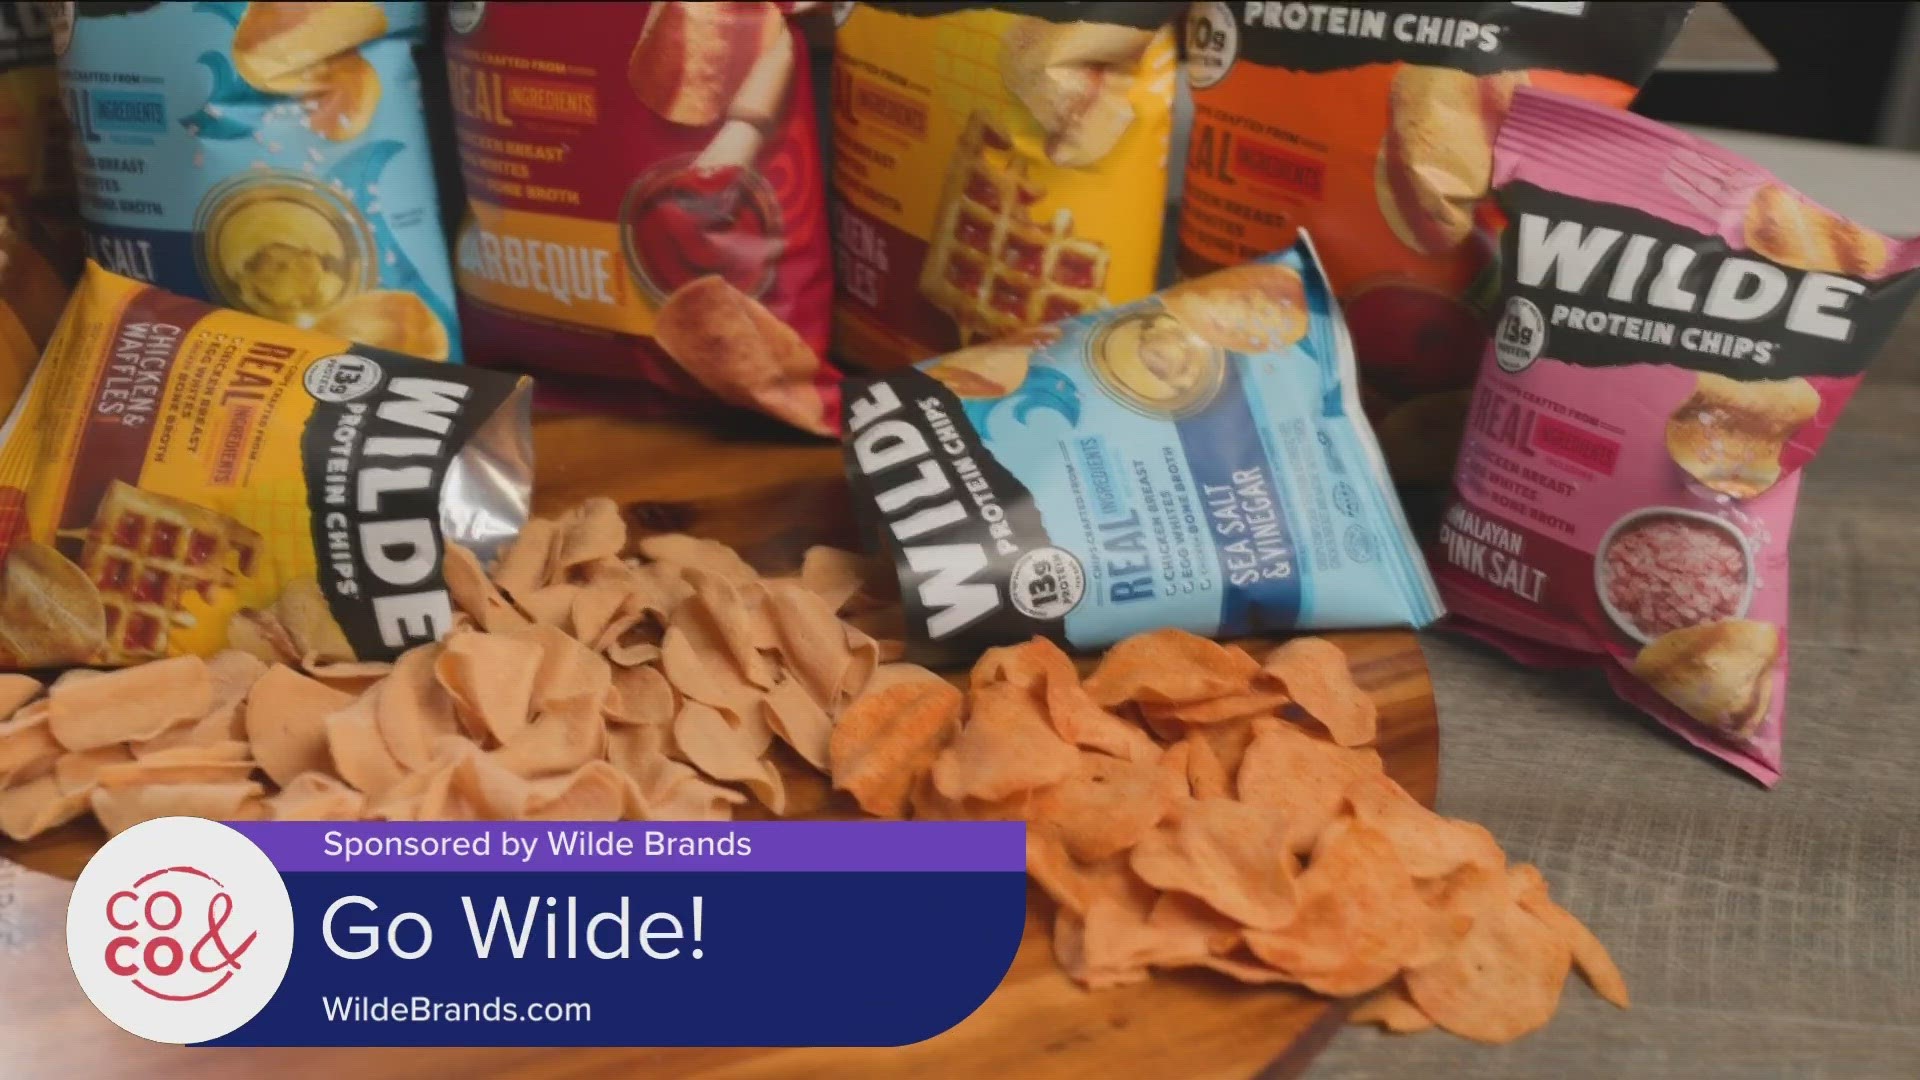 King Soopers is your home for Optimum Wellness. Find your flavor of Wilde Chips at a King Soopers near you. **PAID CONTENT**